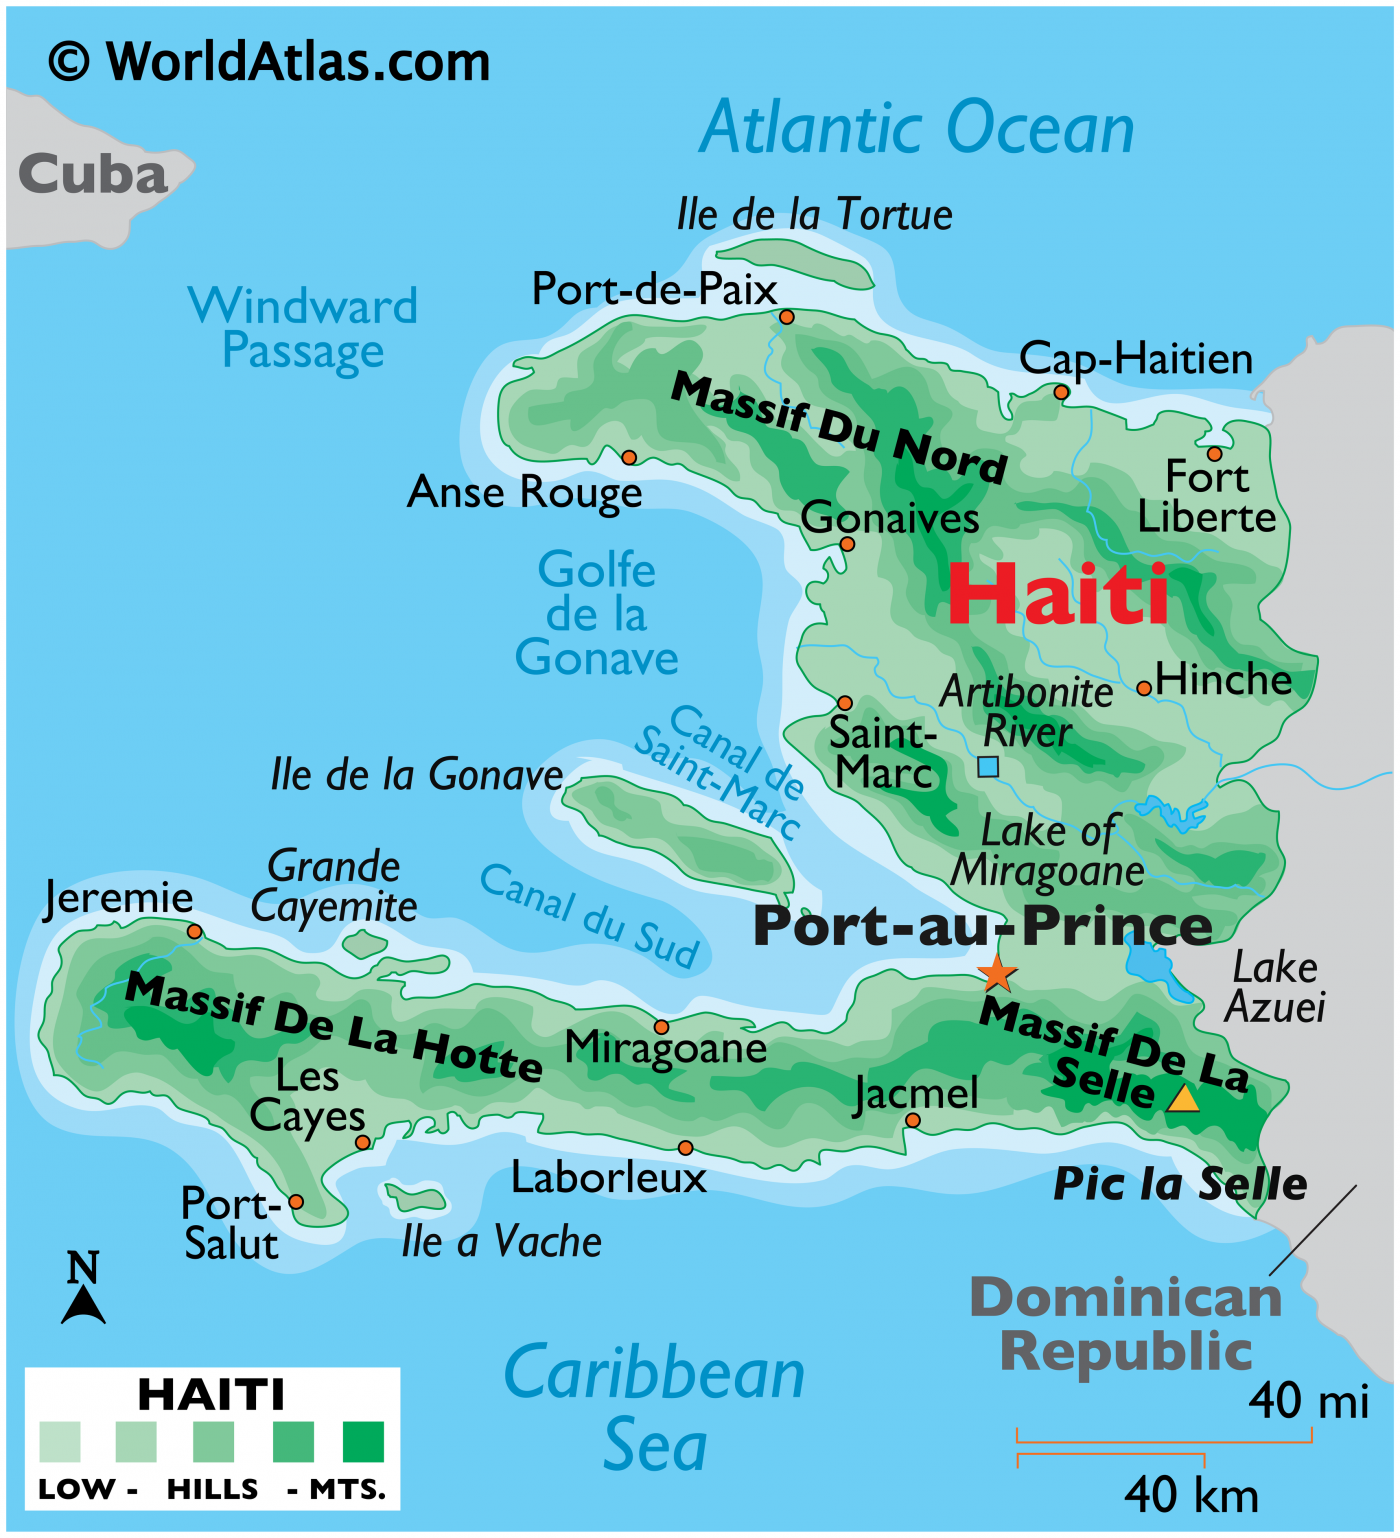 A map of Haiti, showing the different regions of the country